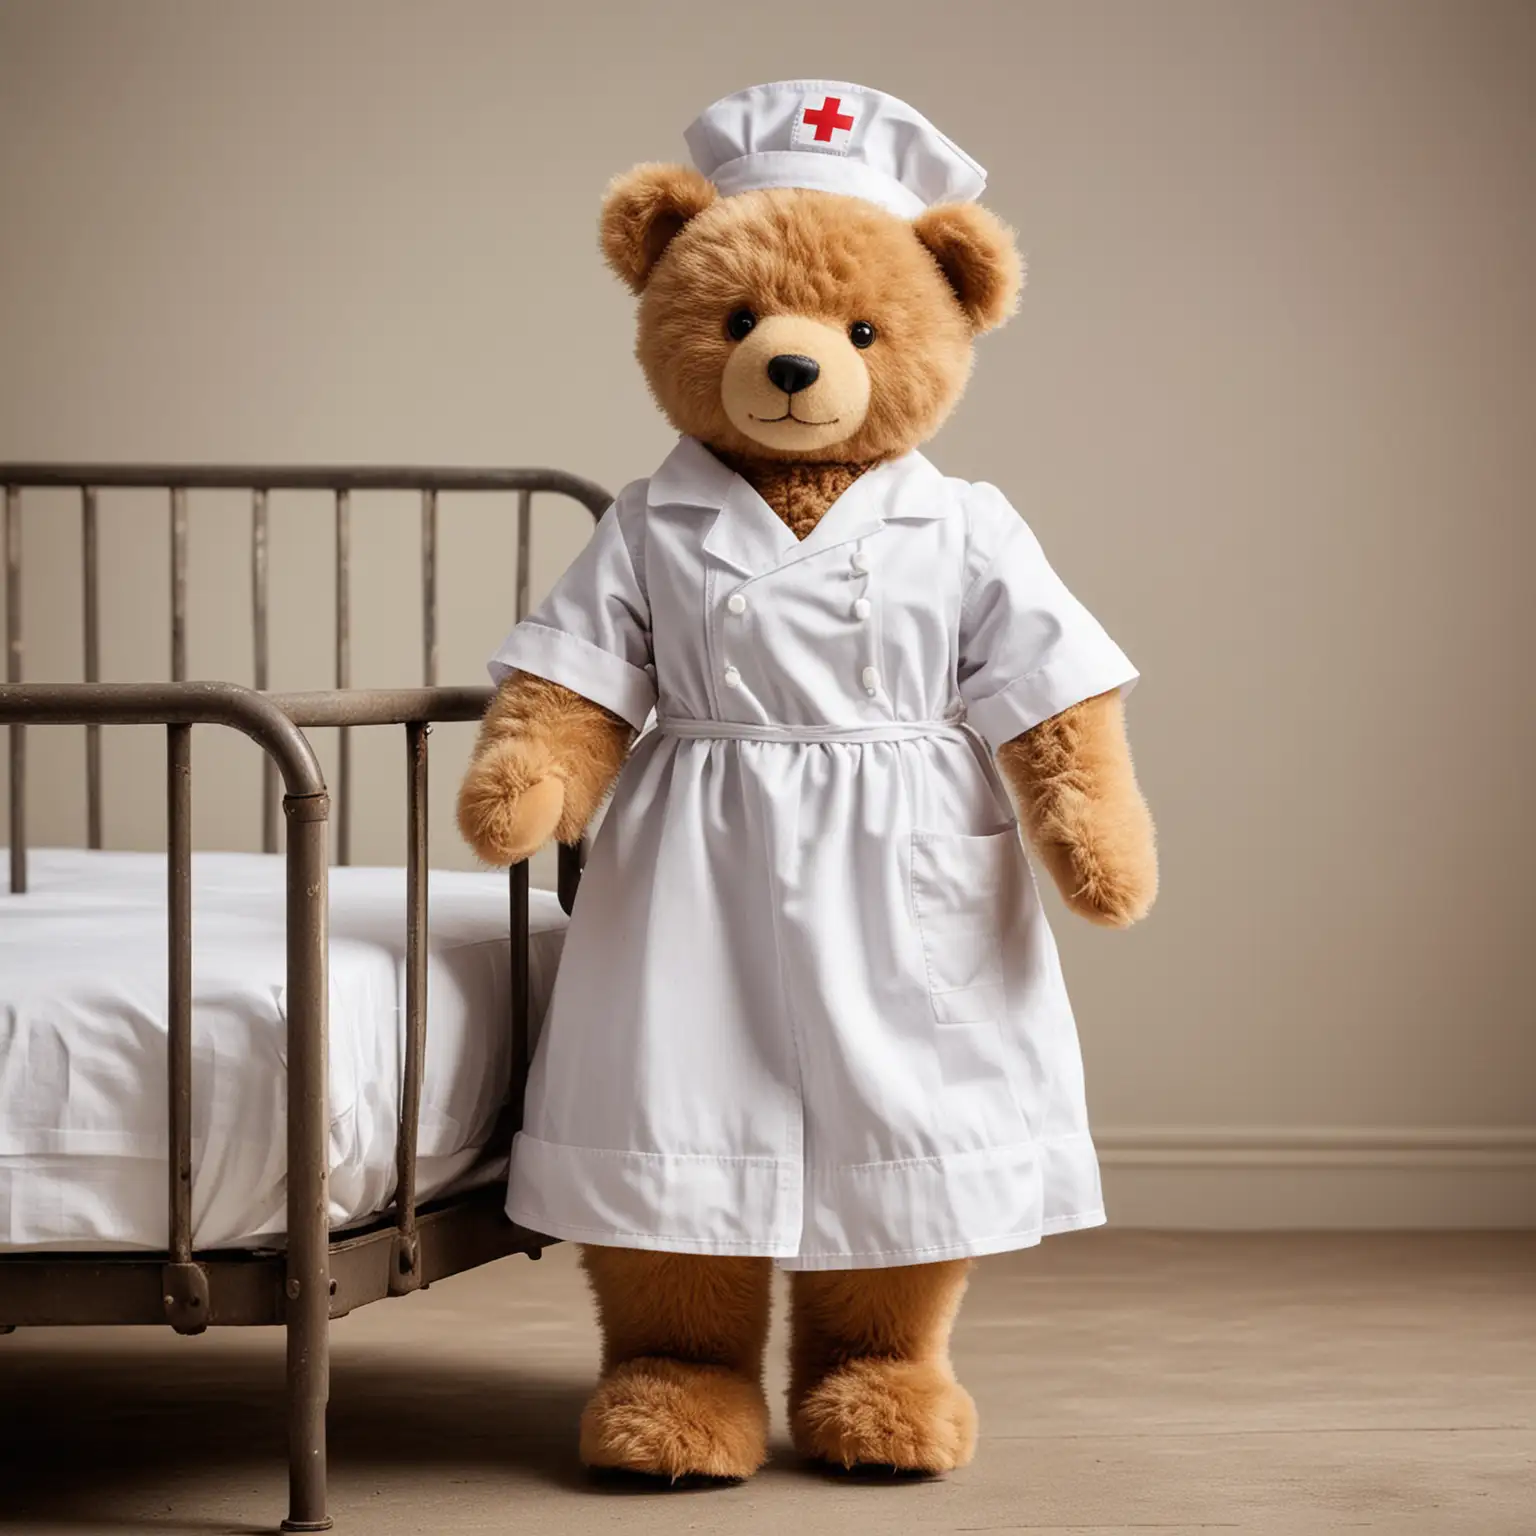 Vintage Teddy Bear hospital nurse, standing next to an old metal bed, dressed as a nurse, blank background